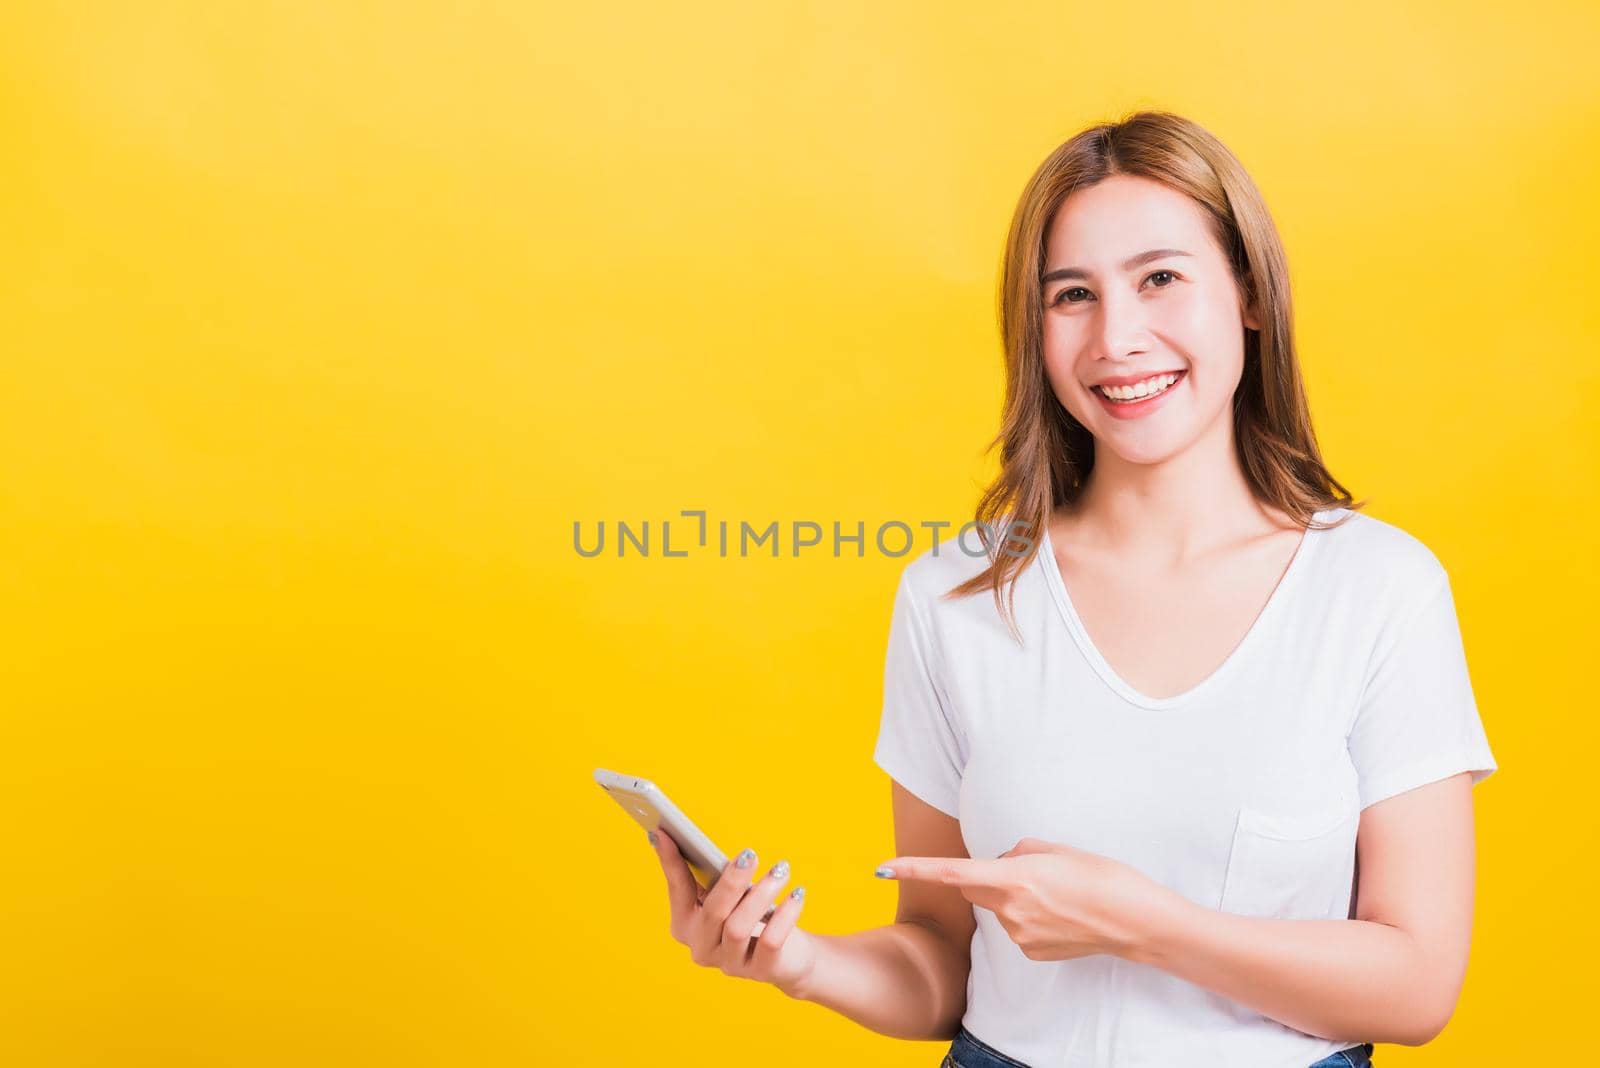 Asian Thai portrait happy beautiful young woman smile standing wear t-shirt making finger pointing on smartphone blank screen looking to camera isolated, studio shot yellow background with copy space